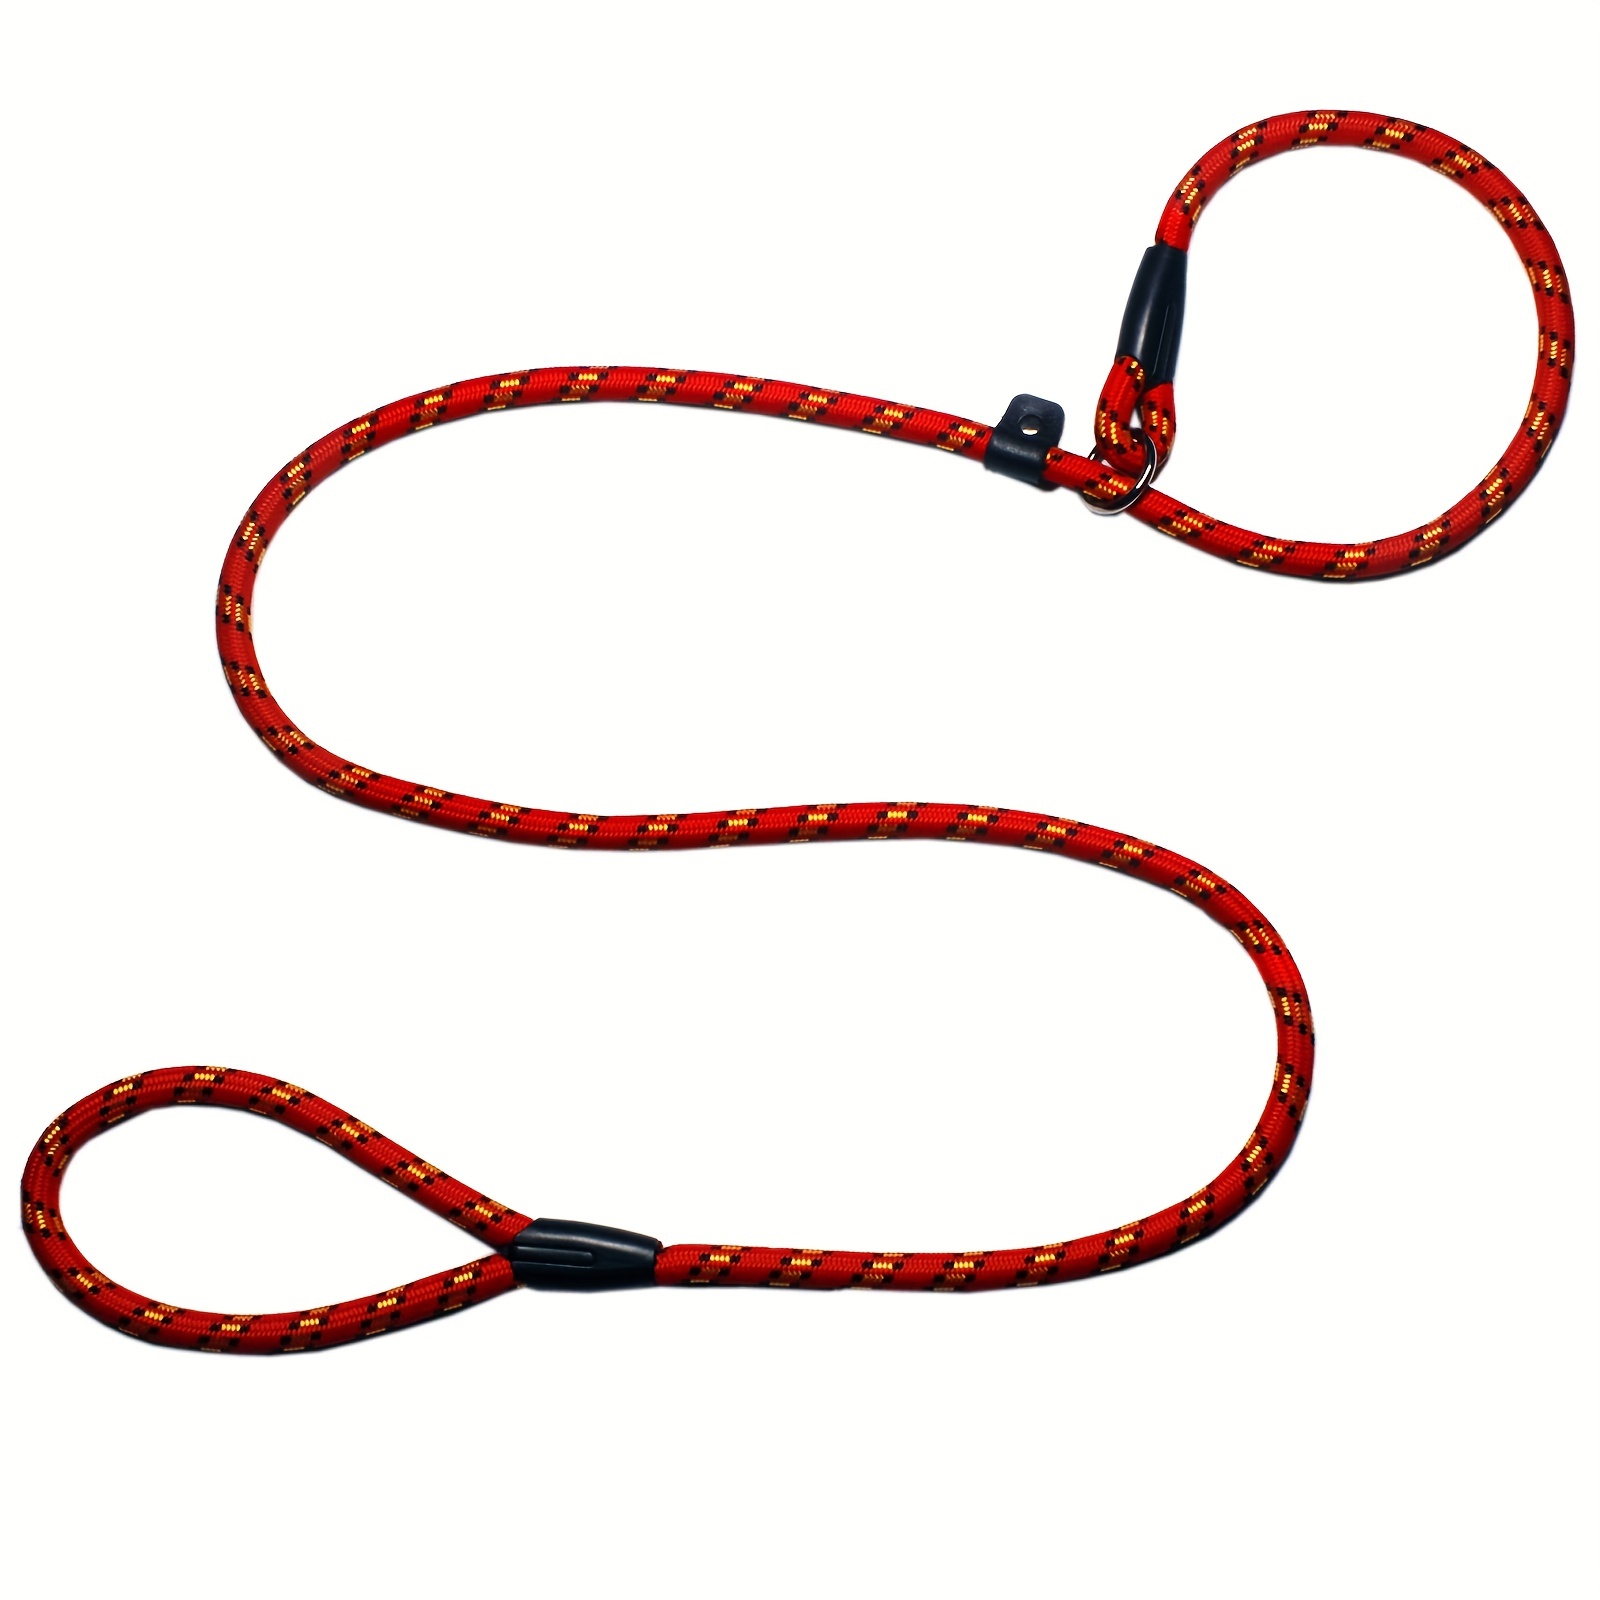 

Durable Dog Slip Lead, Heavy Duty Dog Training Loop Leash, Comfortable Rope Leash With Adjustable Buckle For Small, Medium Dogs